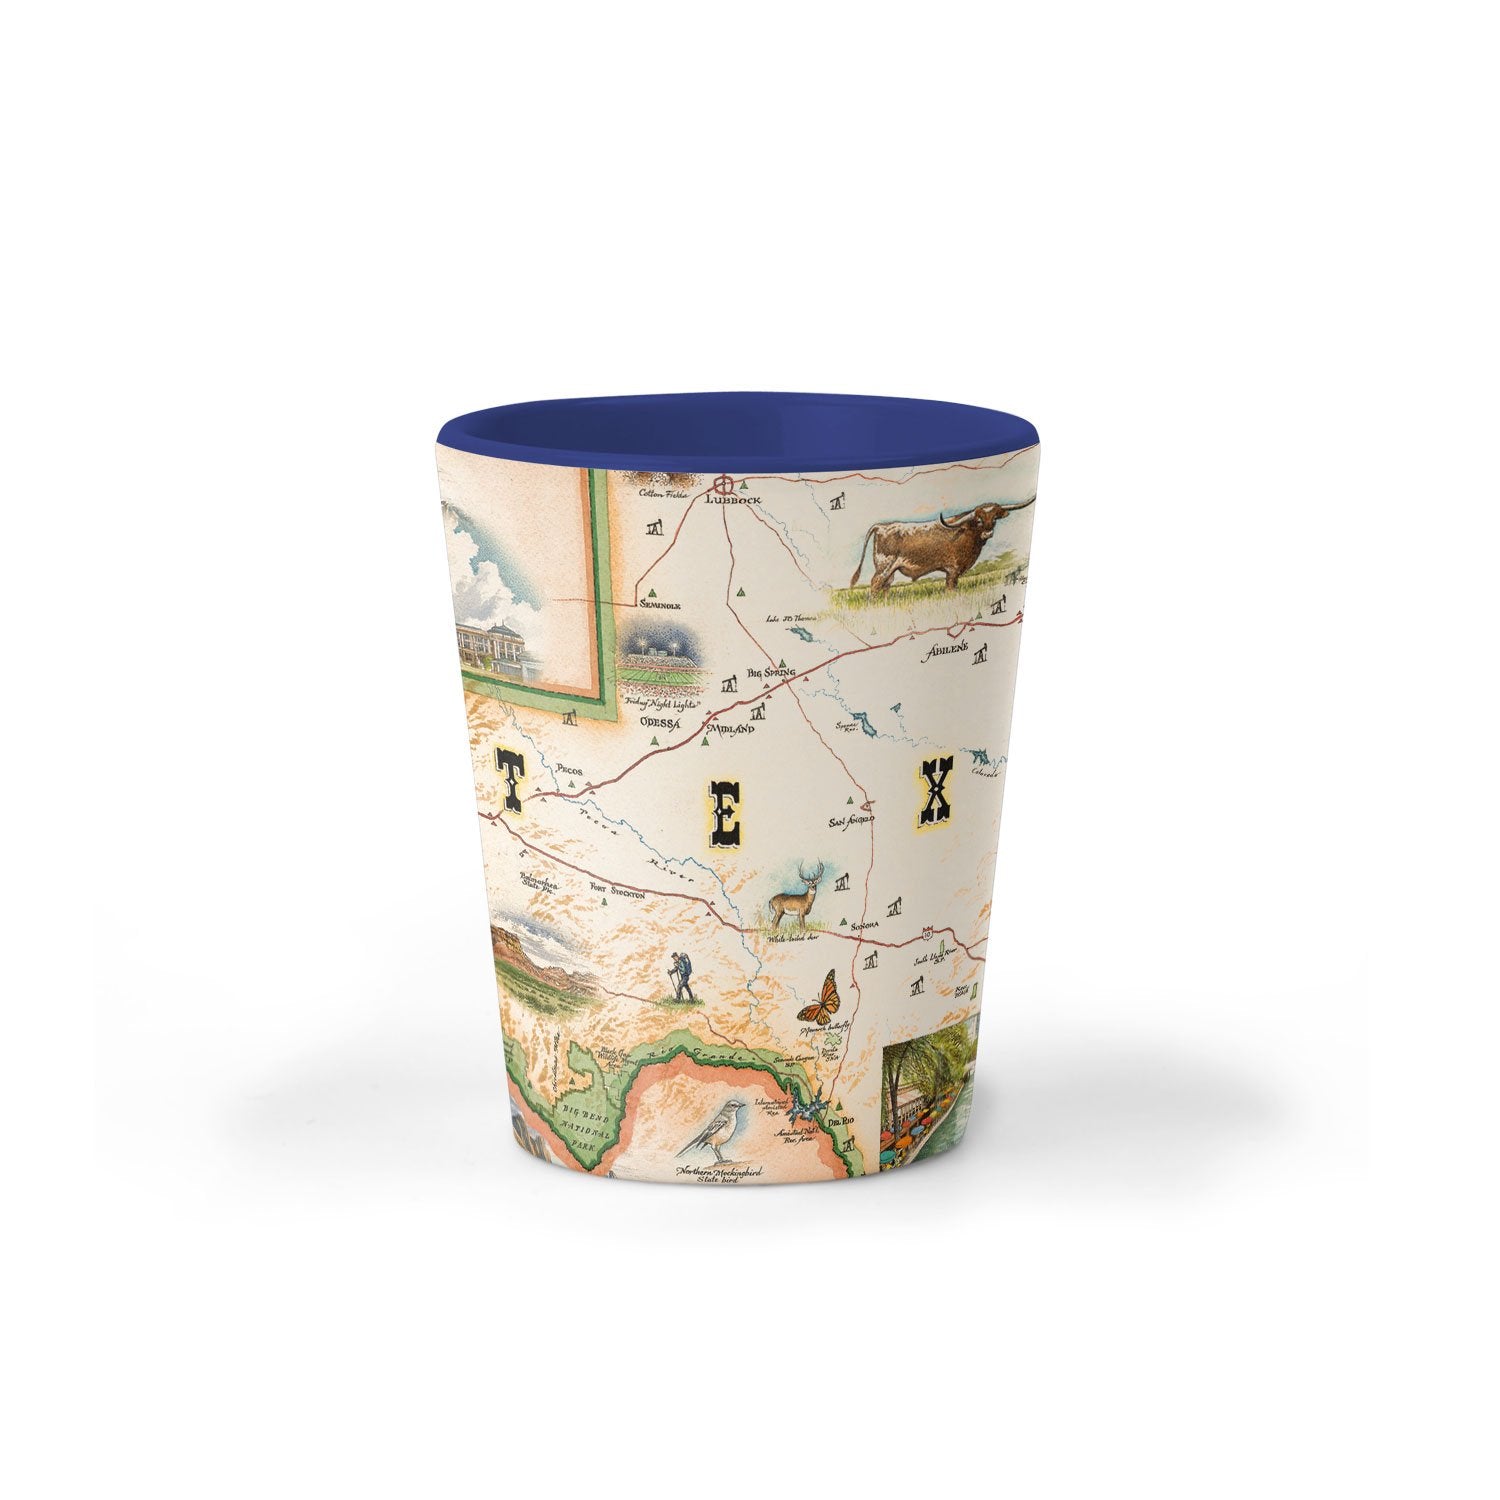 Texas State Map Ceramic shot glass by Xplorer Maps. The map features illustrations of places such as the Alamo, San Antonio Riverwalk, and Guadalupe National Park. Flora and fauna include Venus flytraps, longhorns, Monarch butterflies, and armadillos.